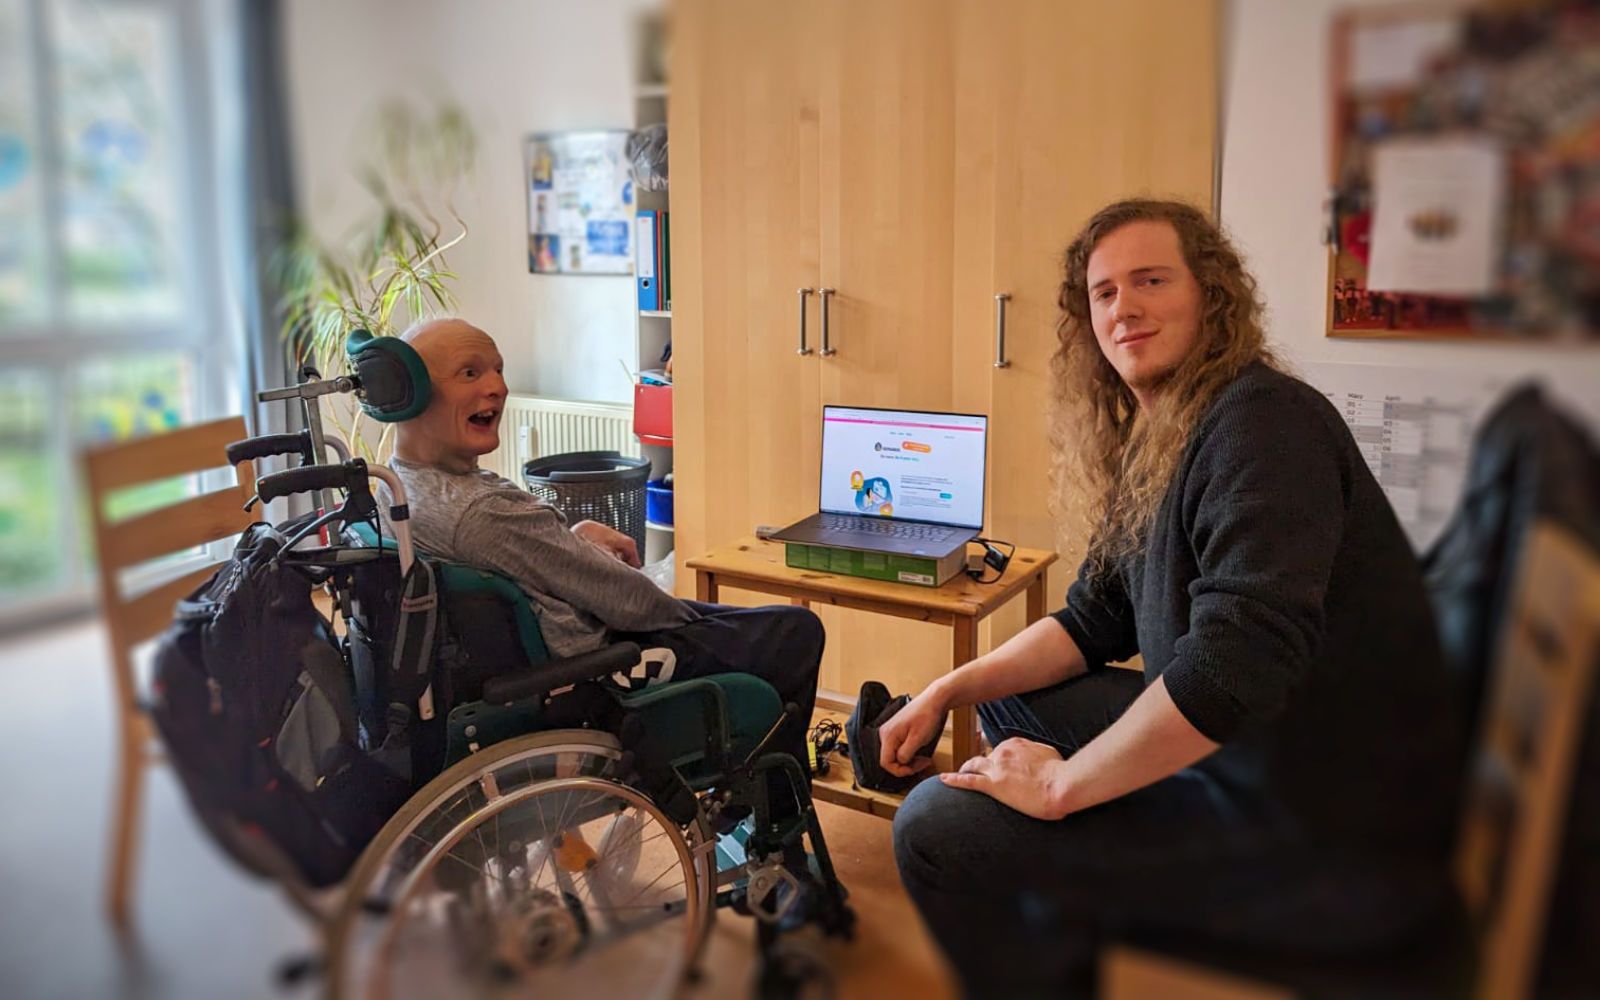 On the left is a participant in a wheelchair, on the right is Lukas sitting on a chair, in the middle a laptop with Semanux.